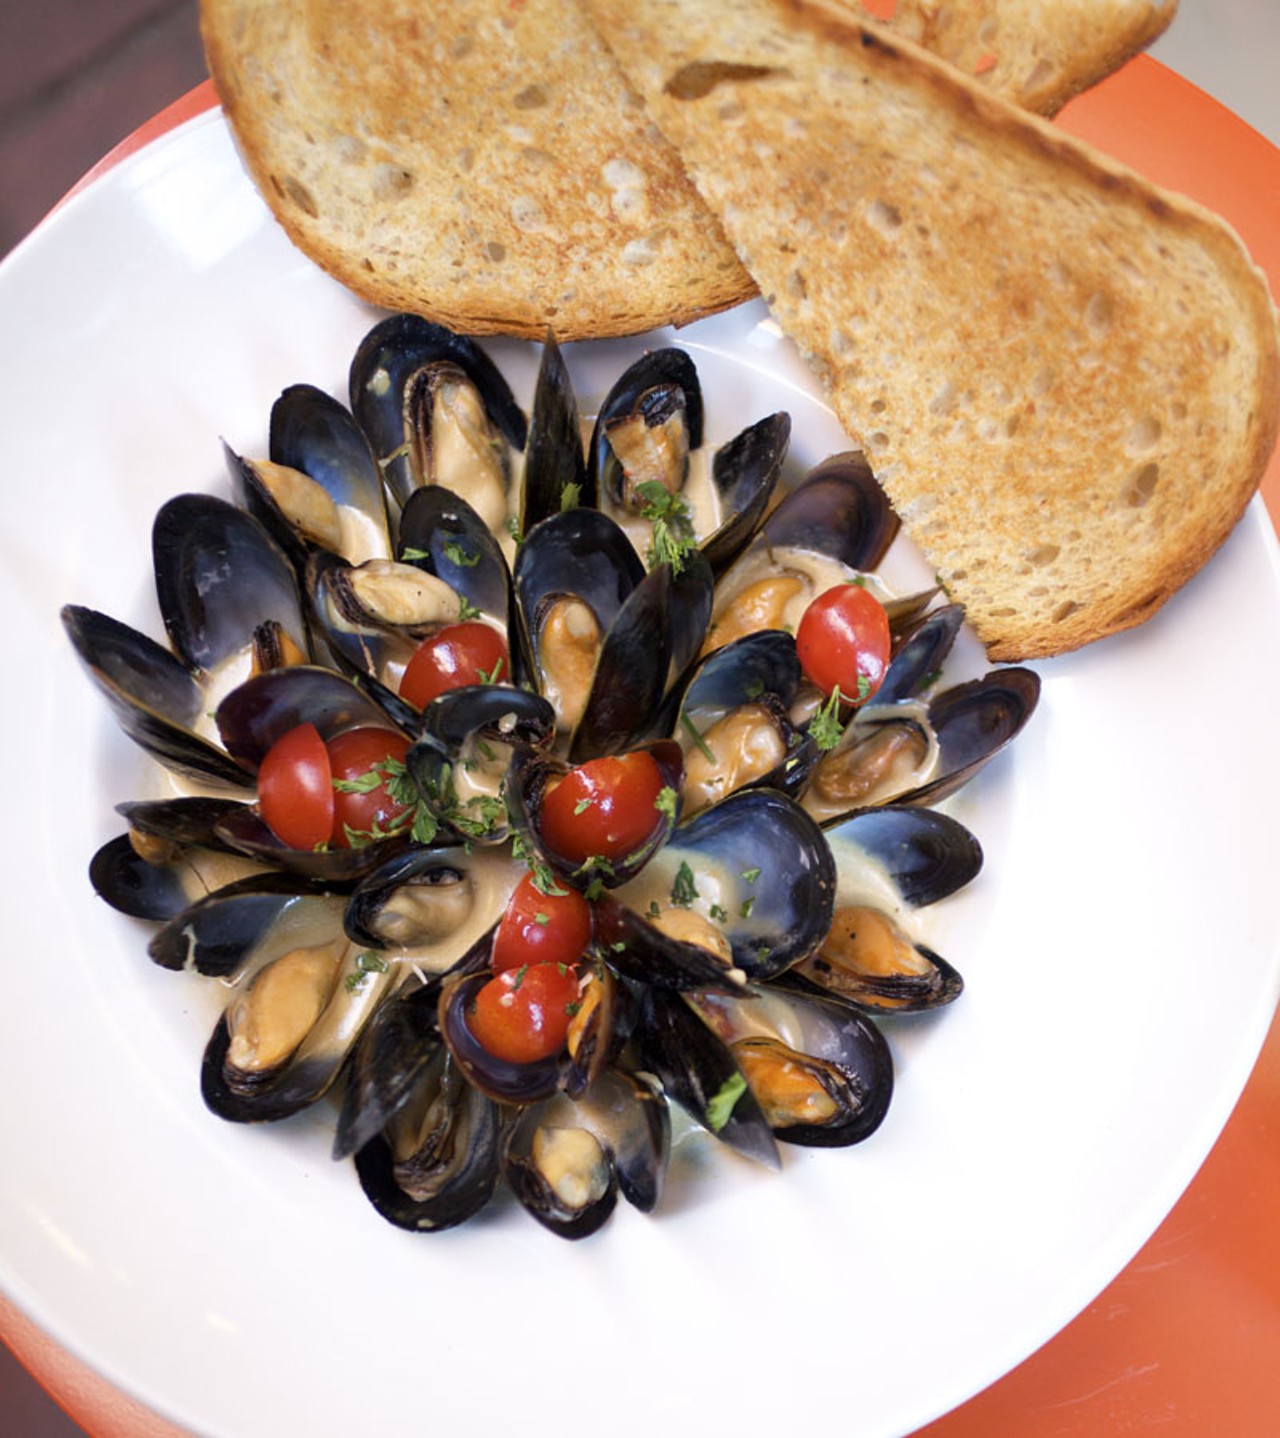 Prince Edward Island Mussels served in a pinot grigio and saffron creme with toasted garlic ciabatta.